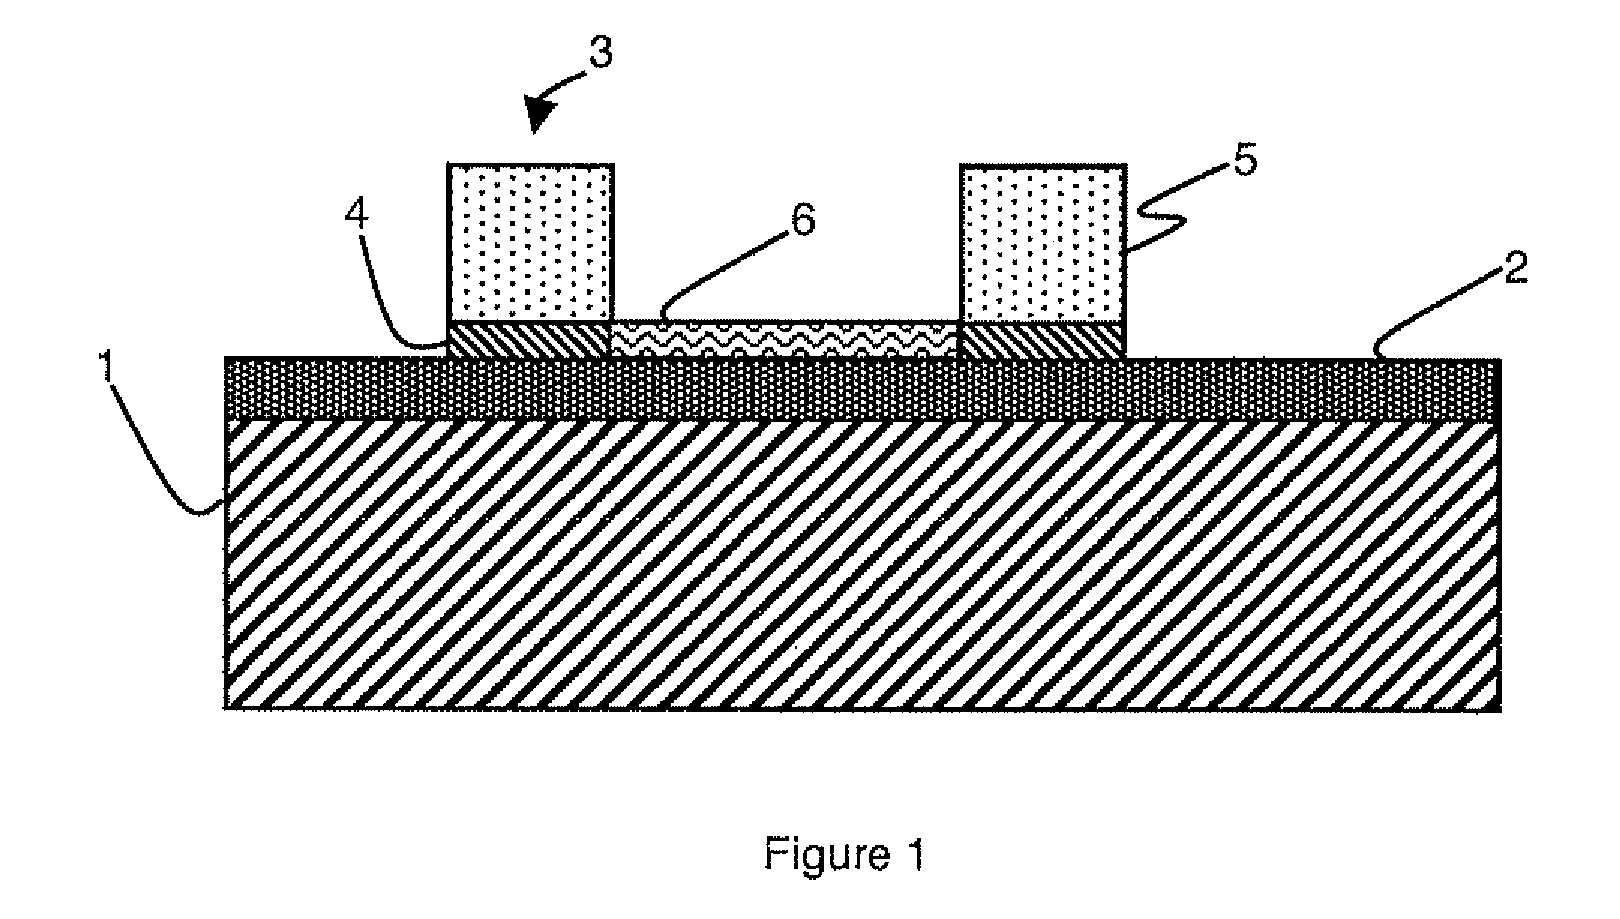 Method of growing, on a dielectric material, nanowires made of semi-conductor materials connecting two electrodes